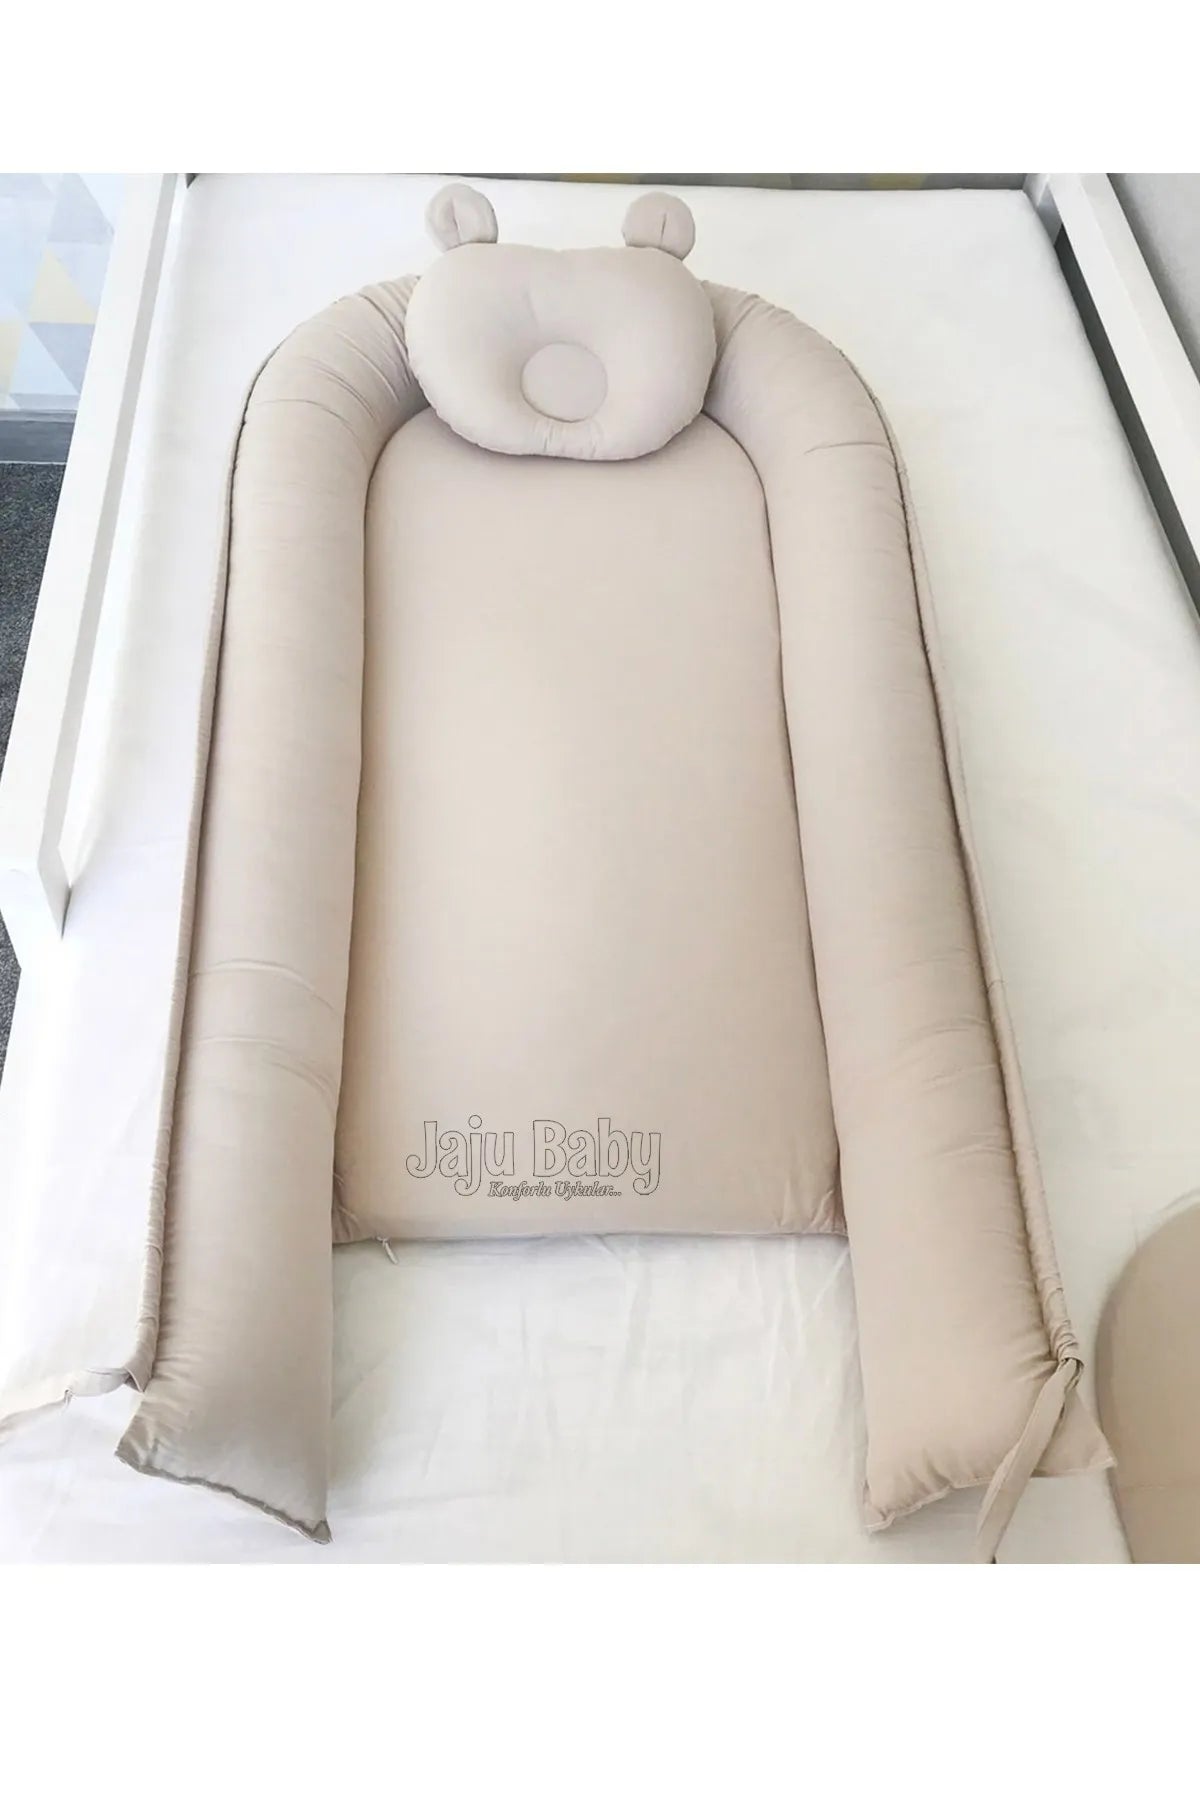 Orthopaedic New-born Baby nest Mother Side Bed